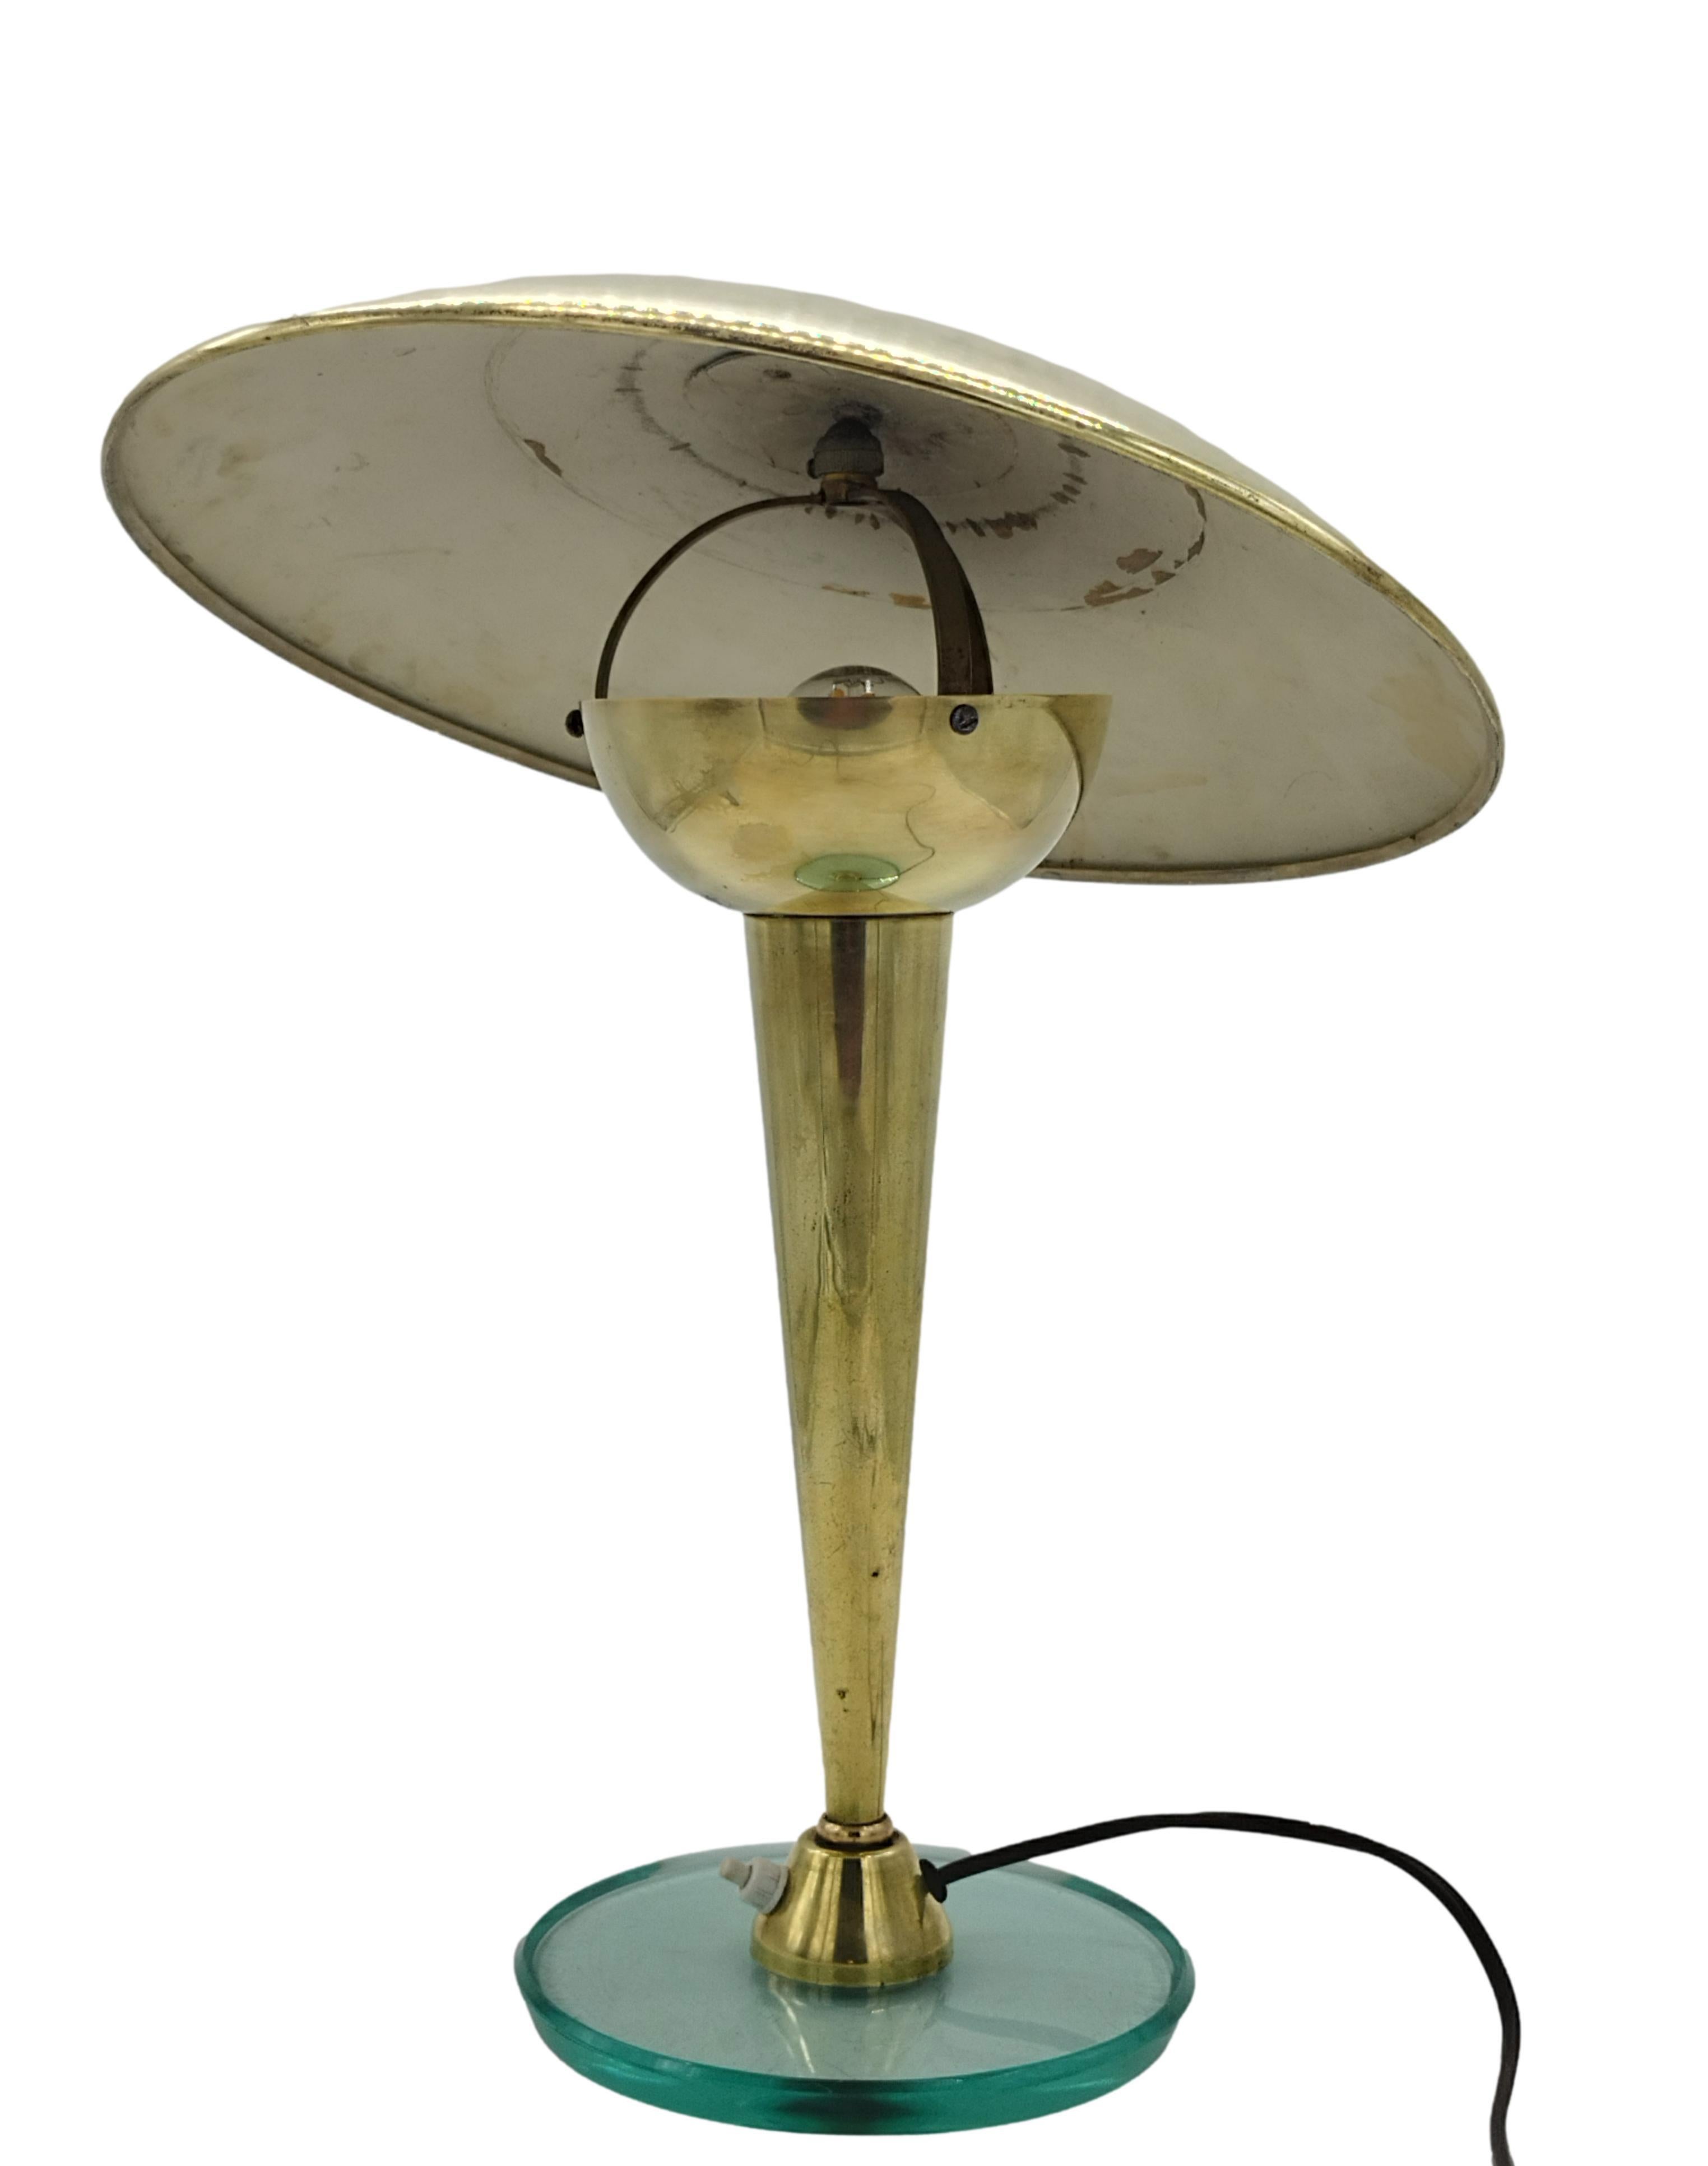 Fine and rare table lamp attributed to Pietro Chiesa for Fontana Arte, circa 1950. The lamp has a nile green crystal glass base and a tapered brass stem, adjustable jointed shade. Condition is good, brass is in patina, glass in perfect condition, in